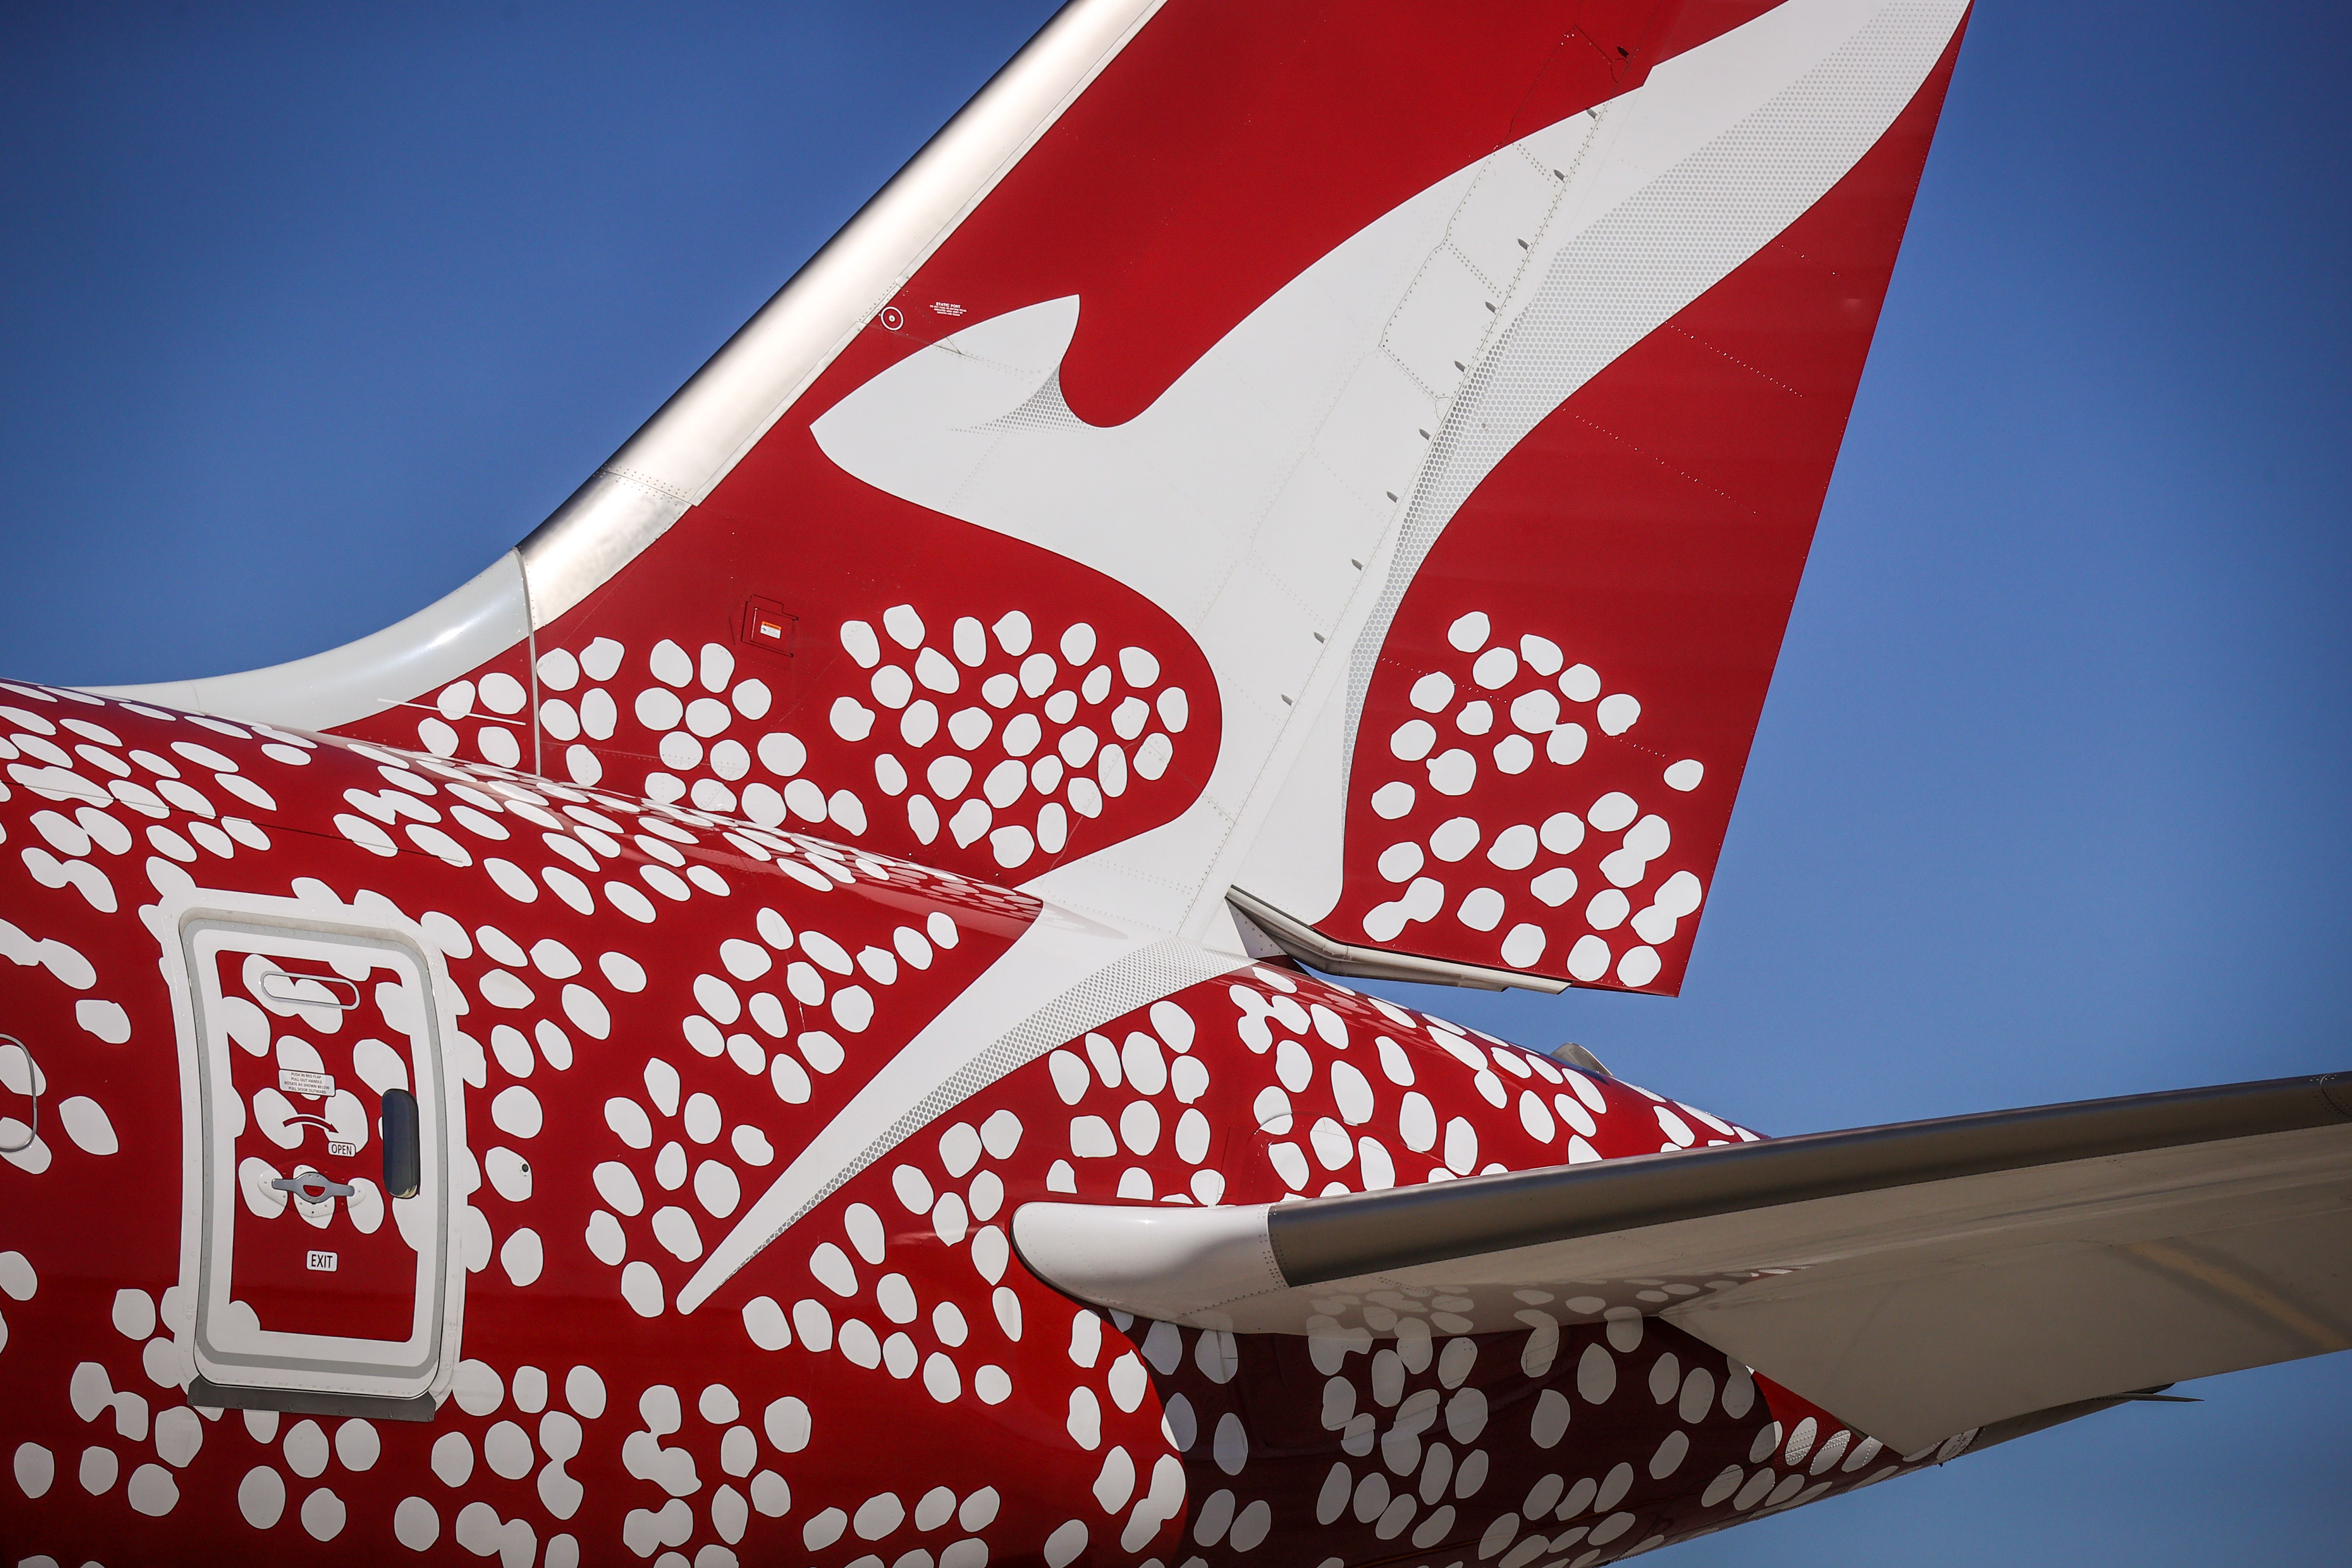 Qantas has launched its largest ever points plane promo